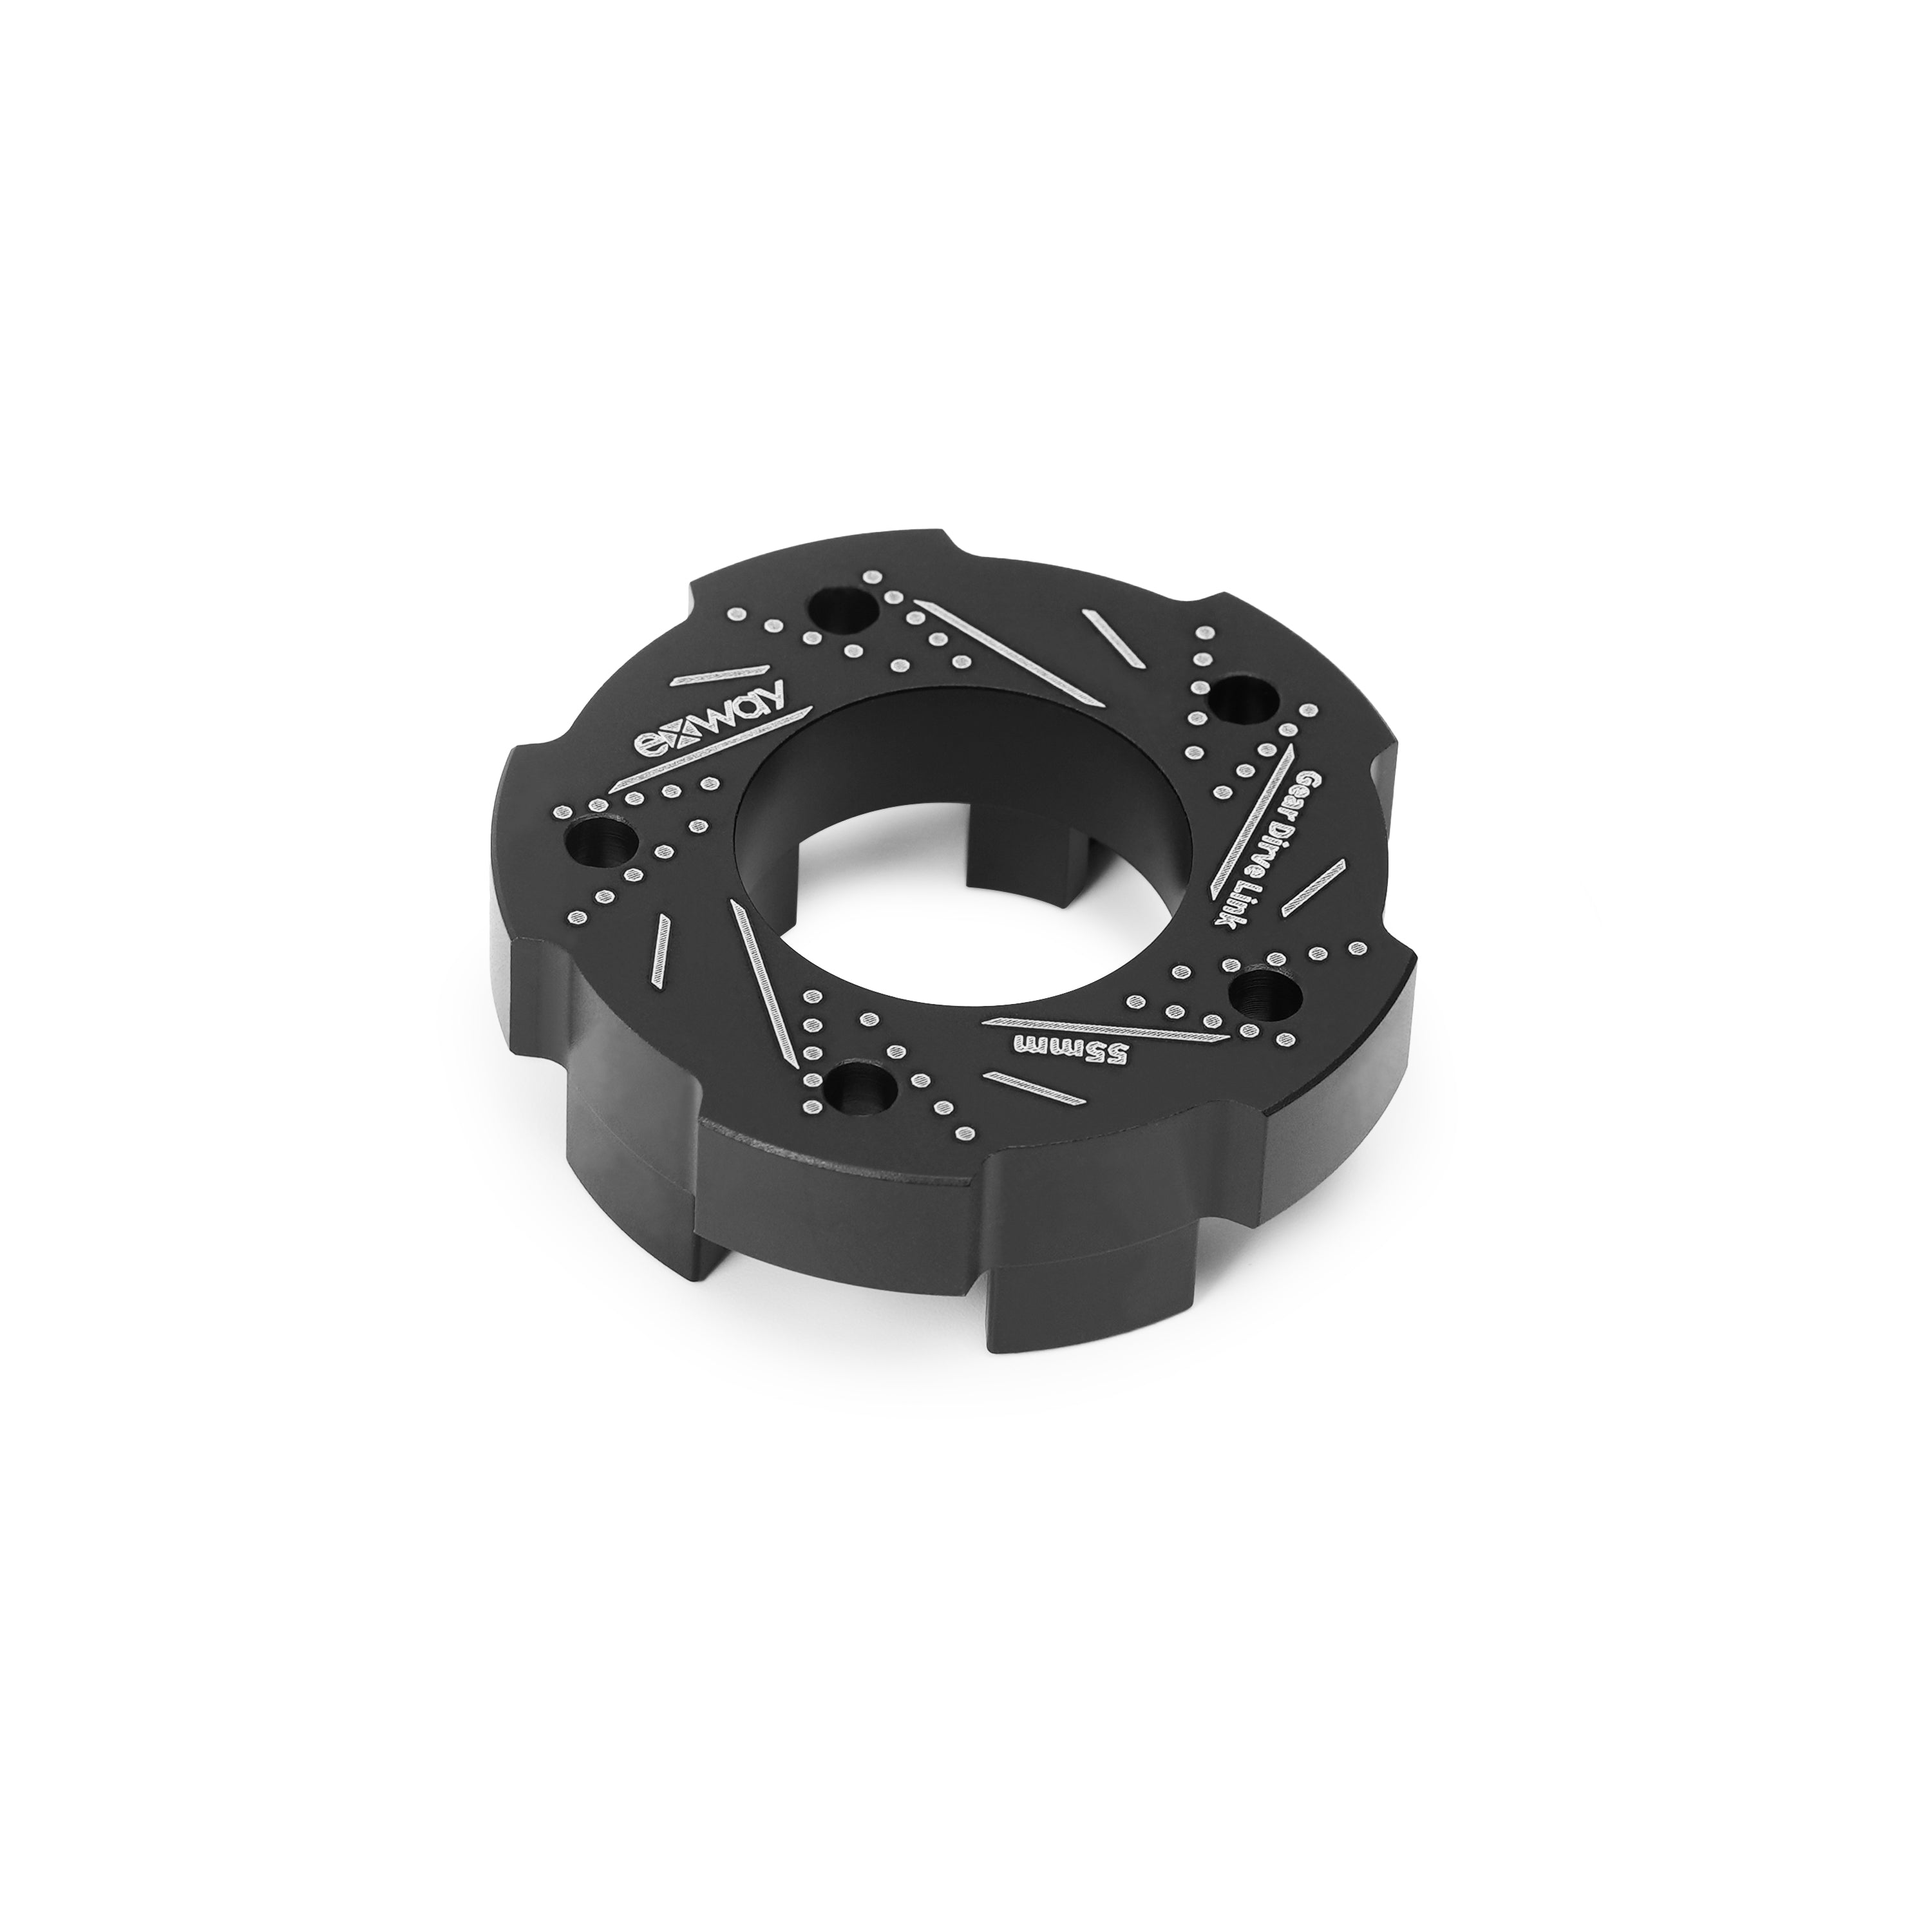 Gear Drive Wheel Adapter for Exway Precision Hubs